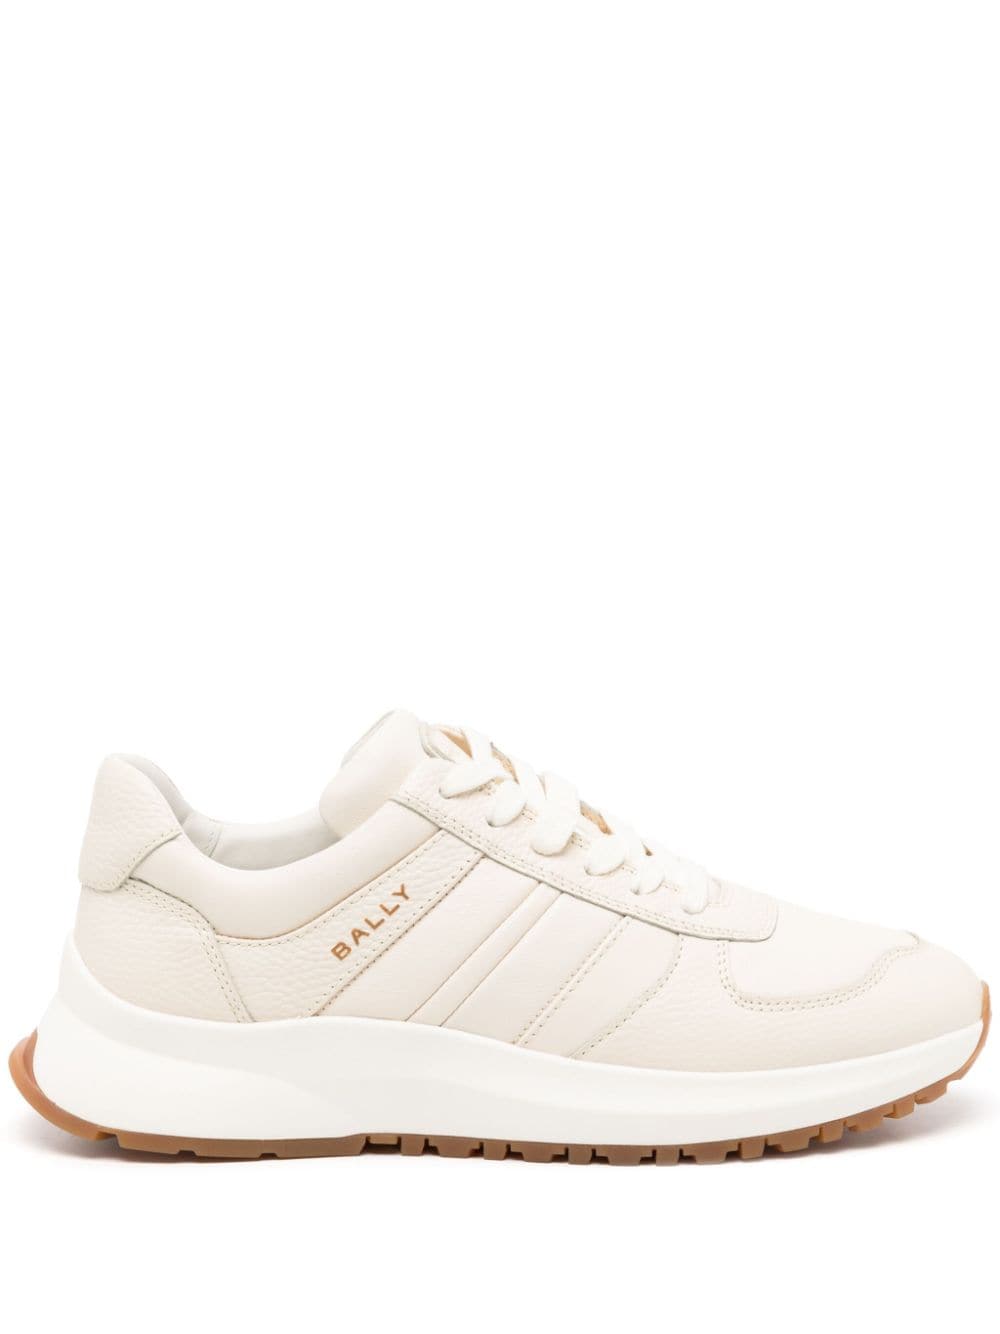 Bally Outline leather sneakers - Neutrals